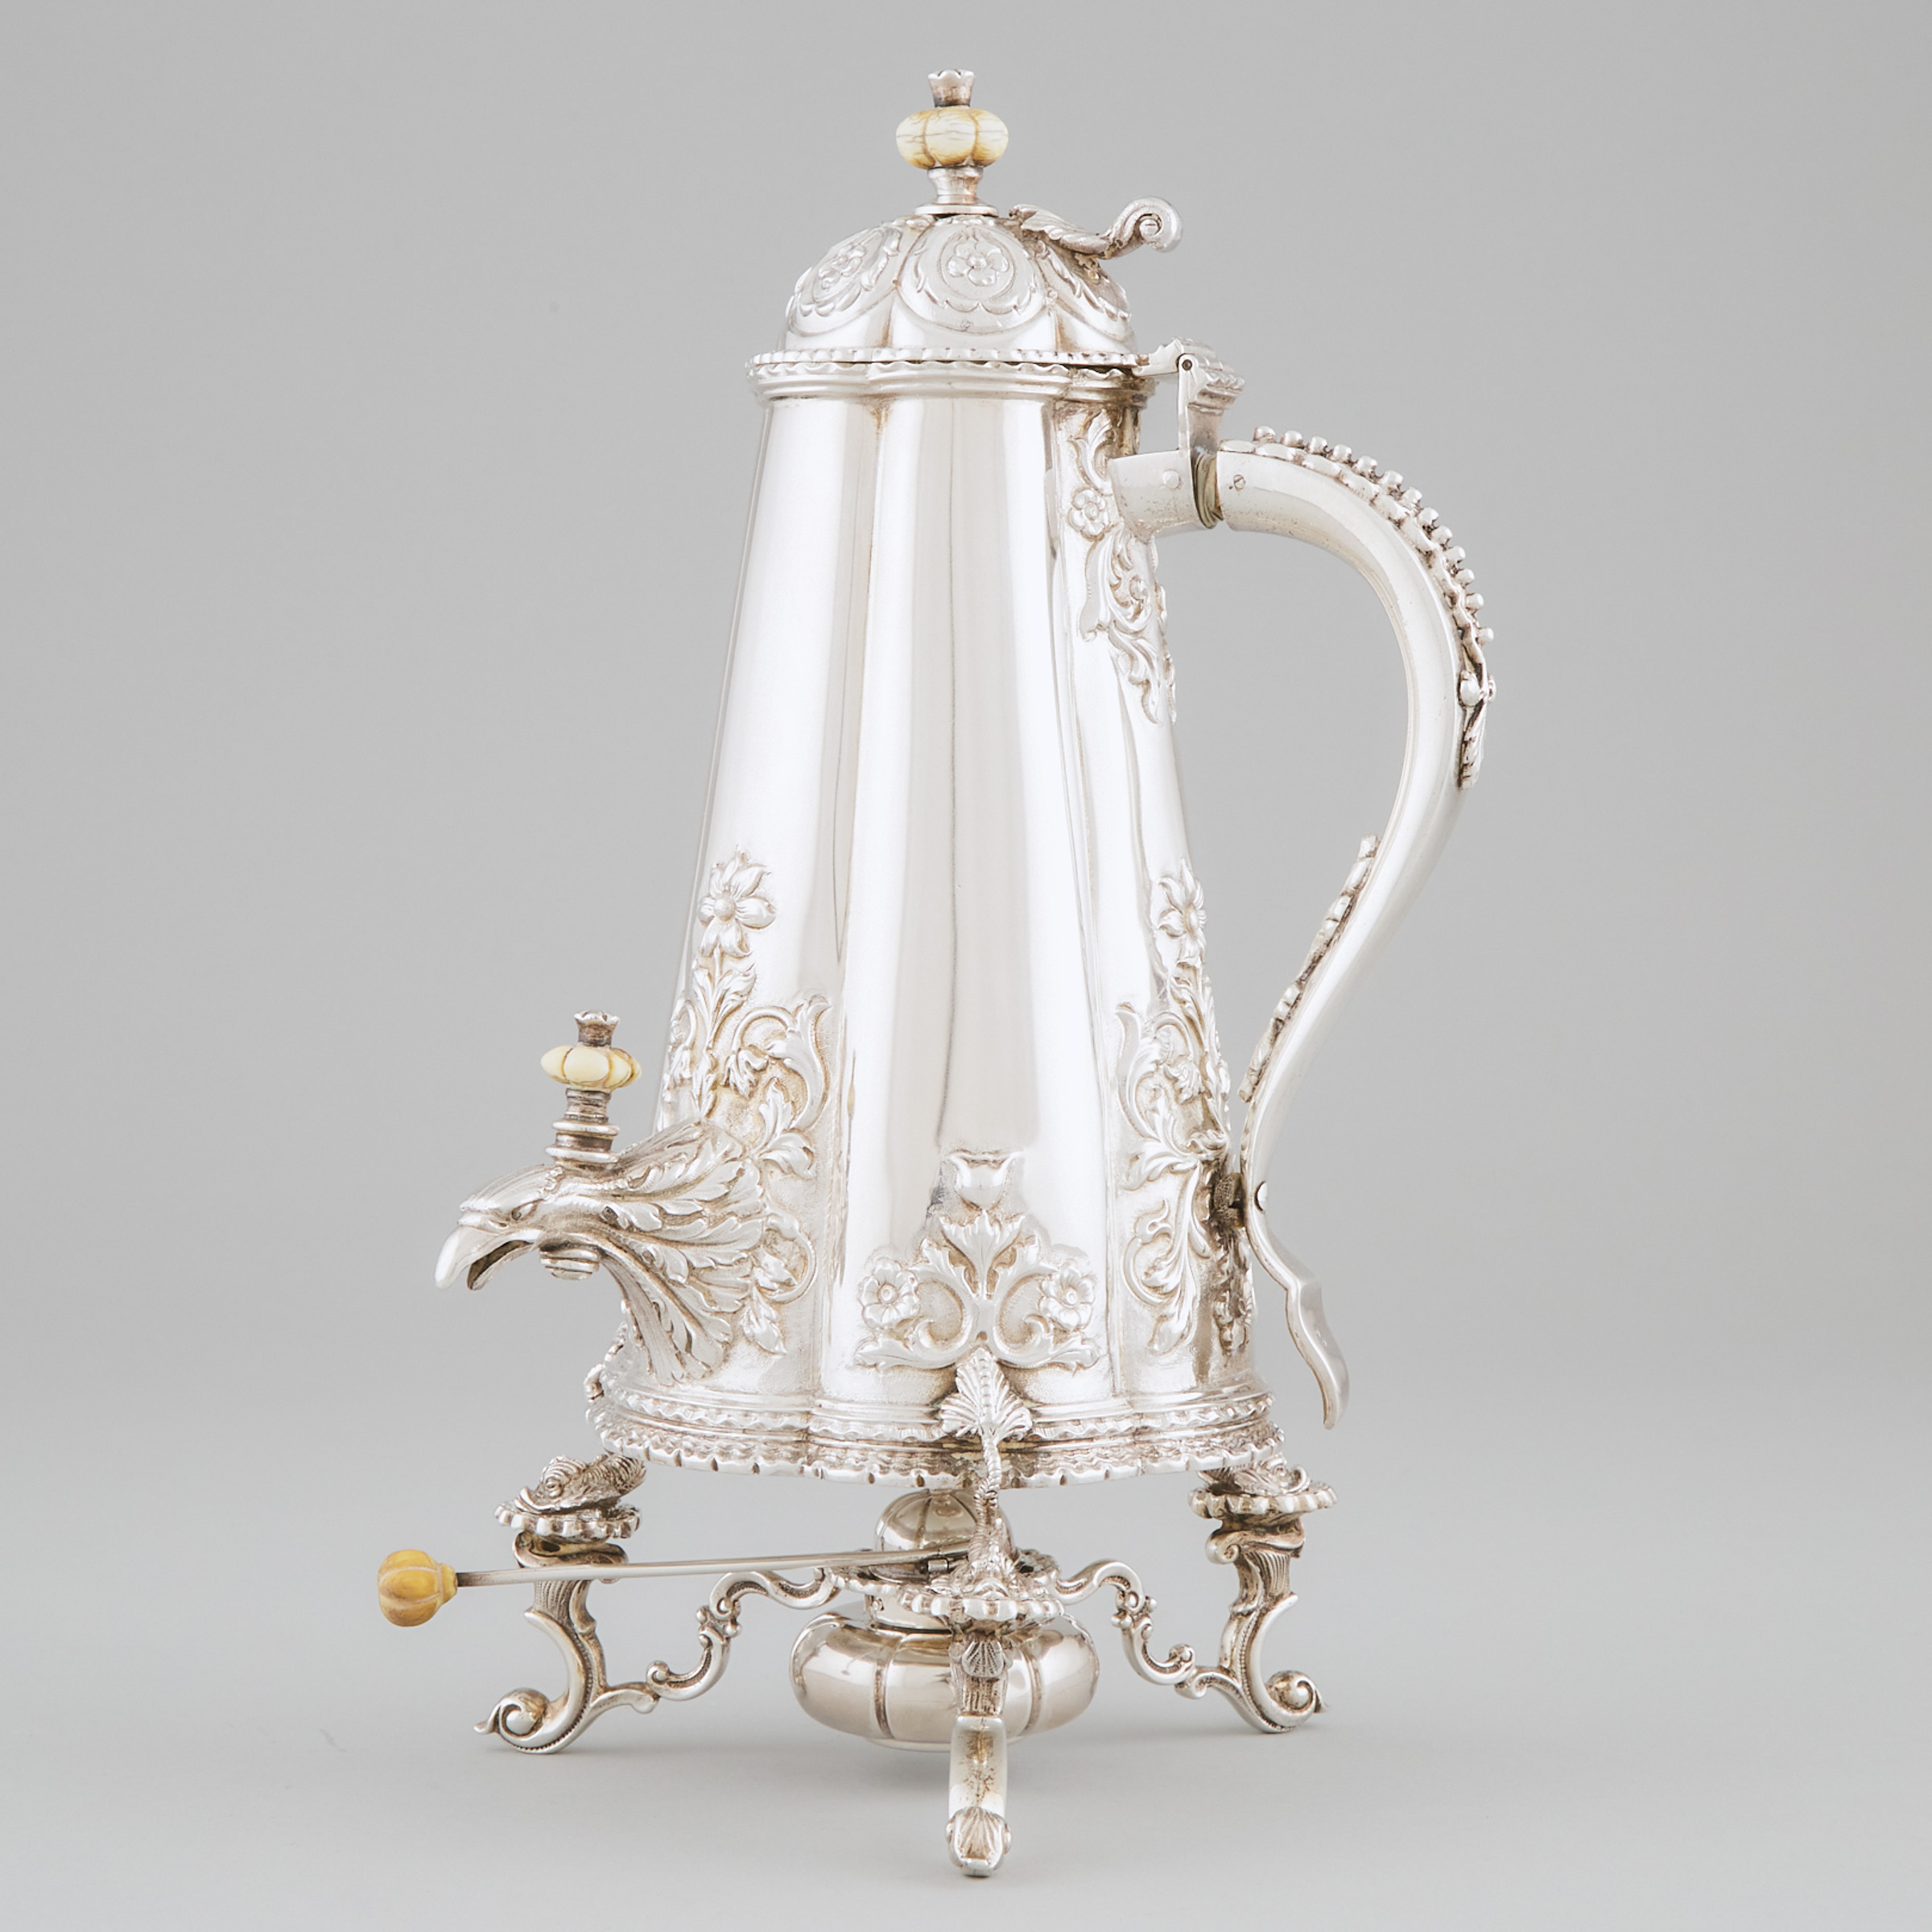 Portuguese Silver Tea Urn on Lampstand, Lisbon, early 20th century